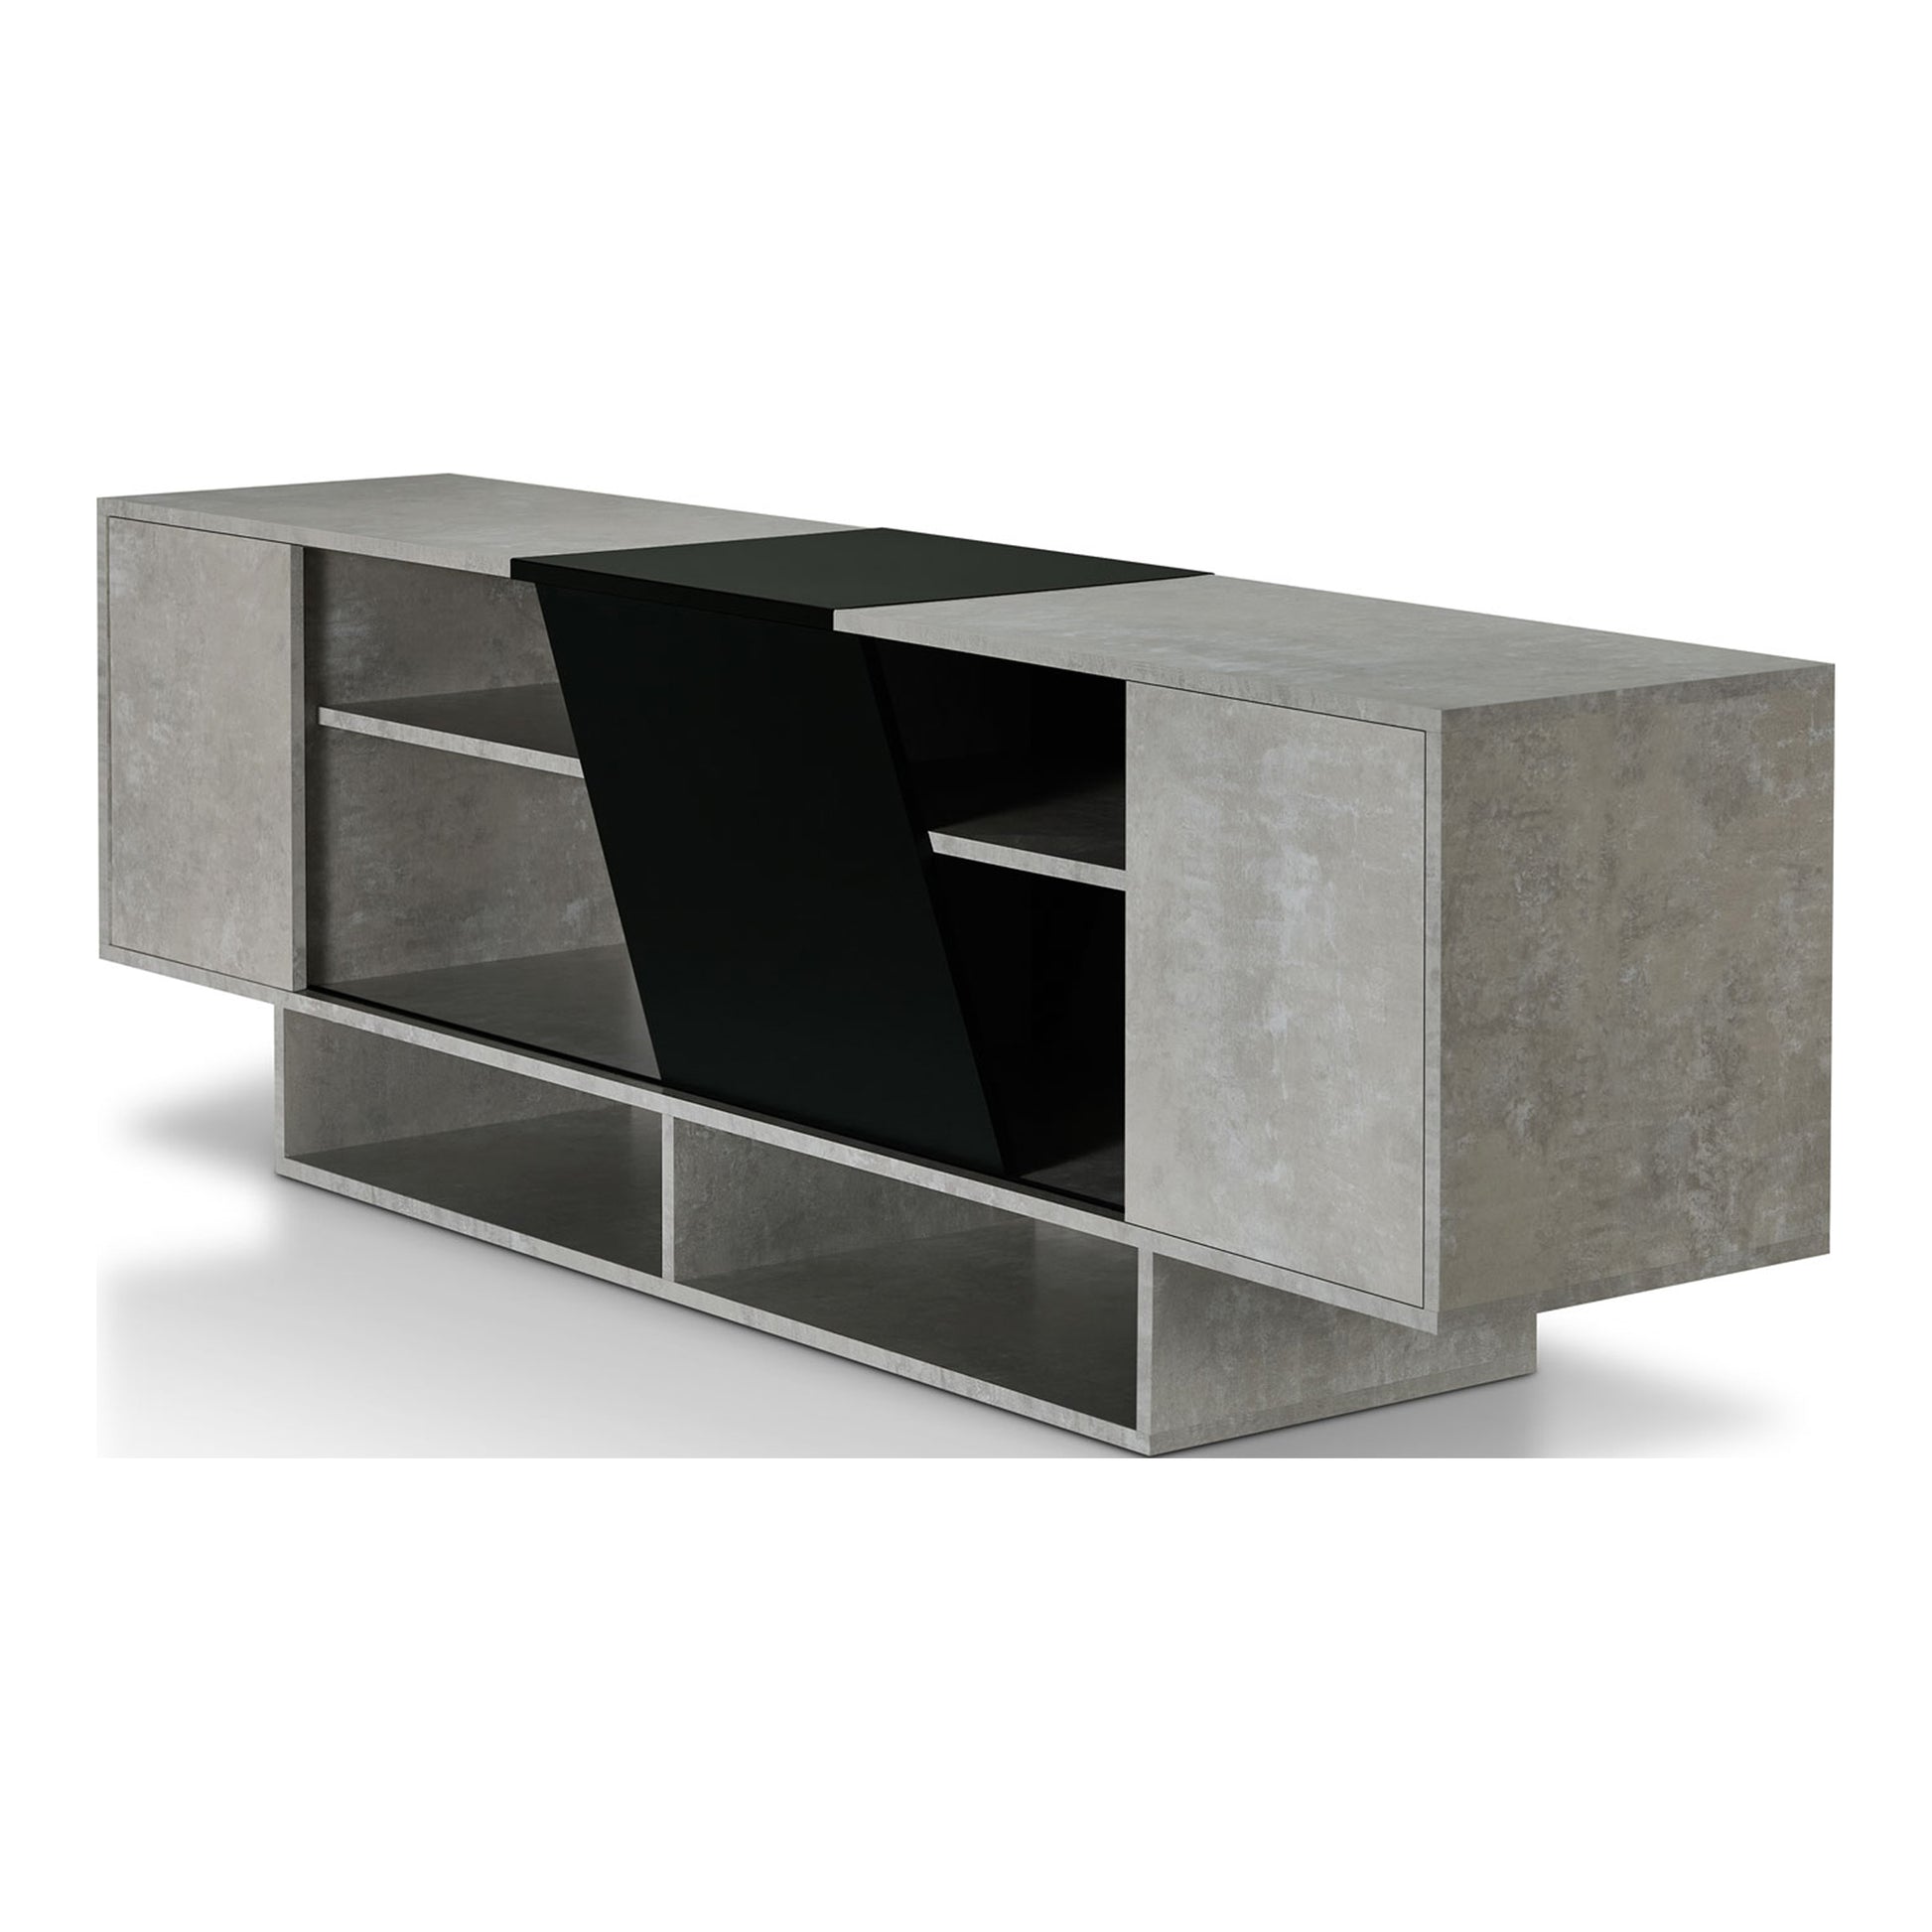 Left angled modern cement gray and black six-shelf TV stand on a white background